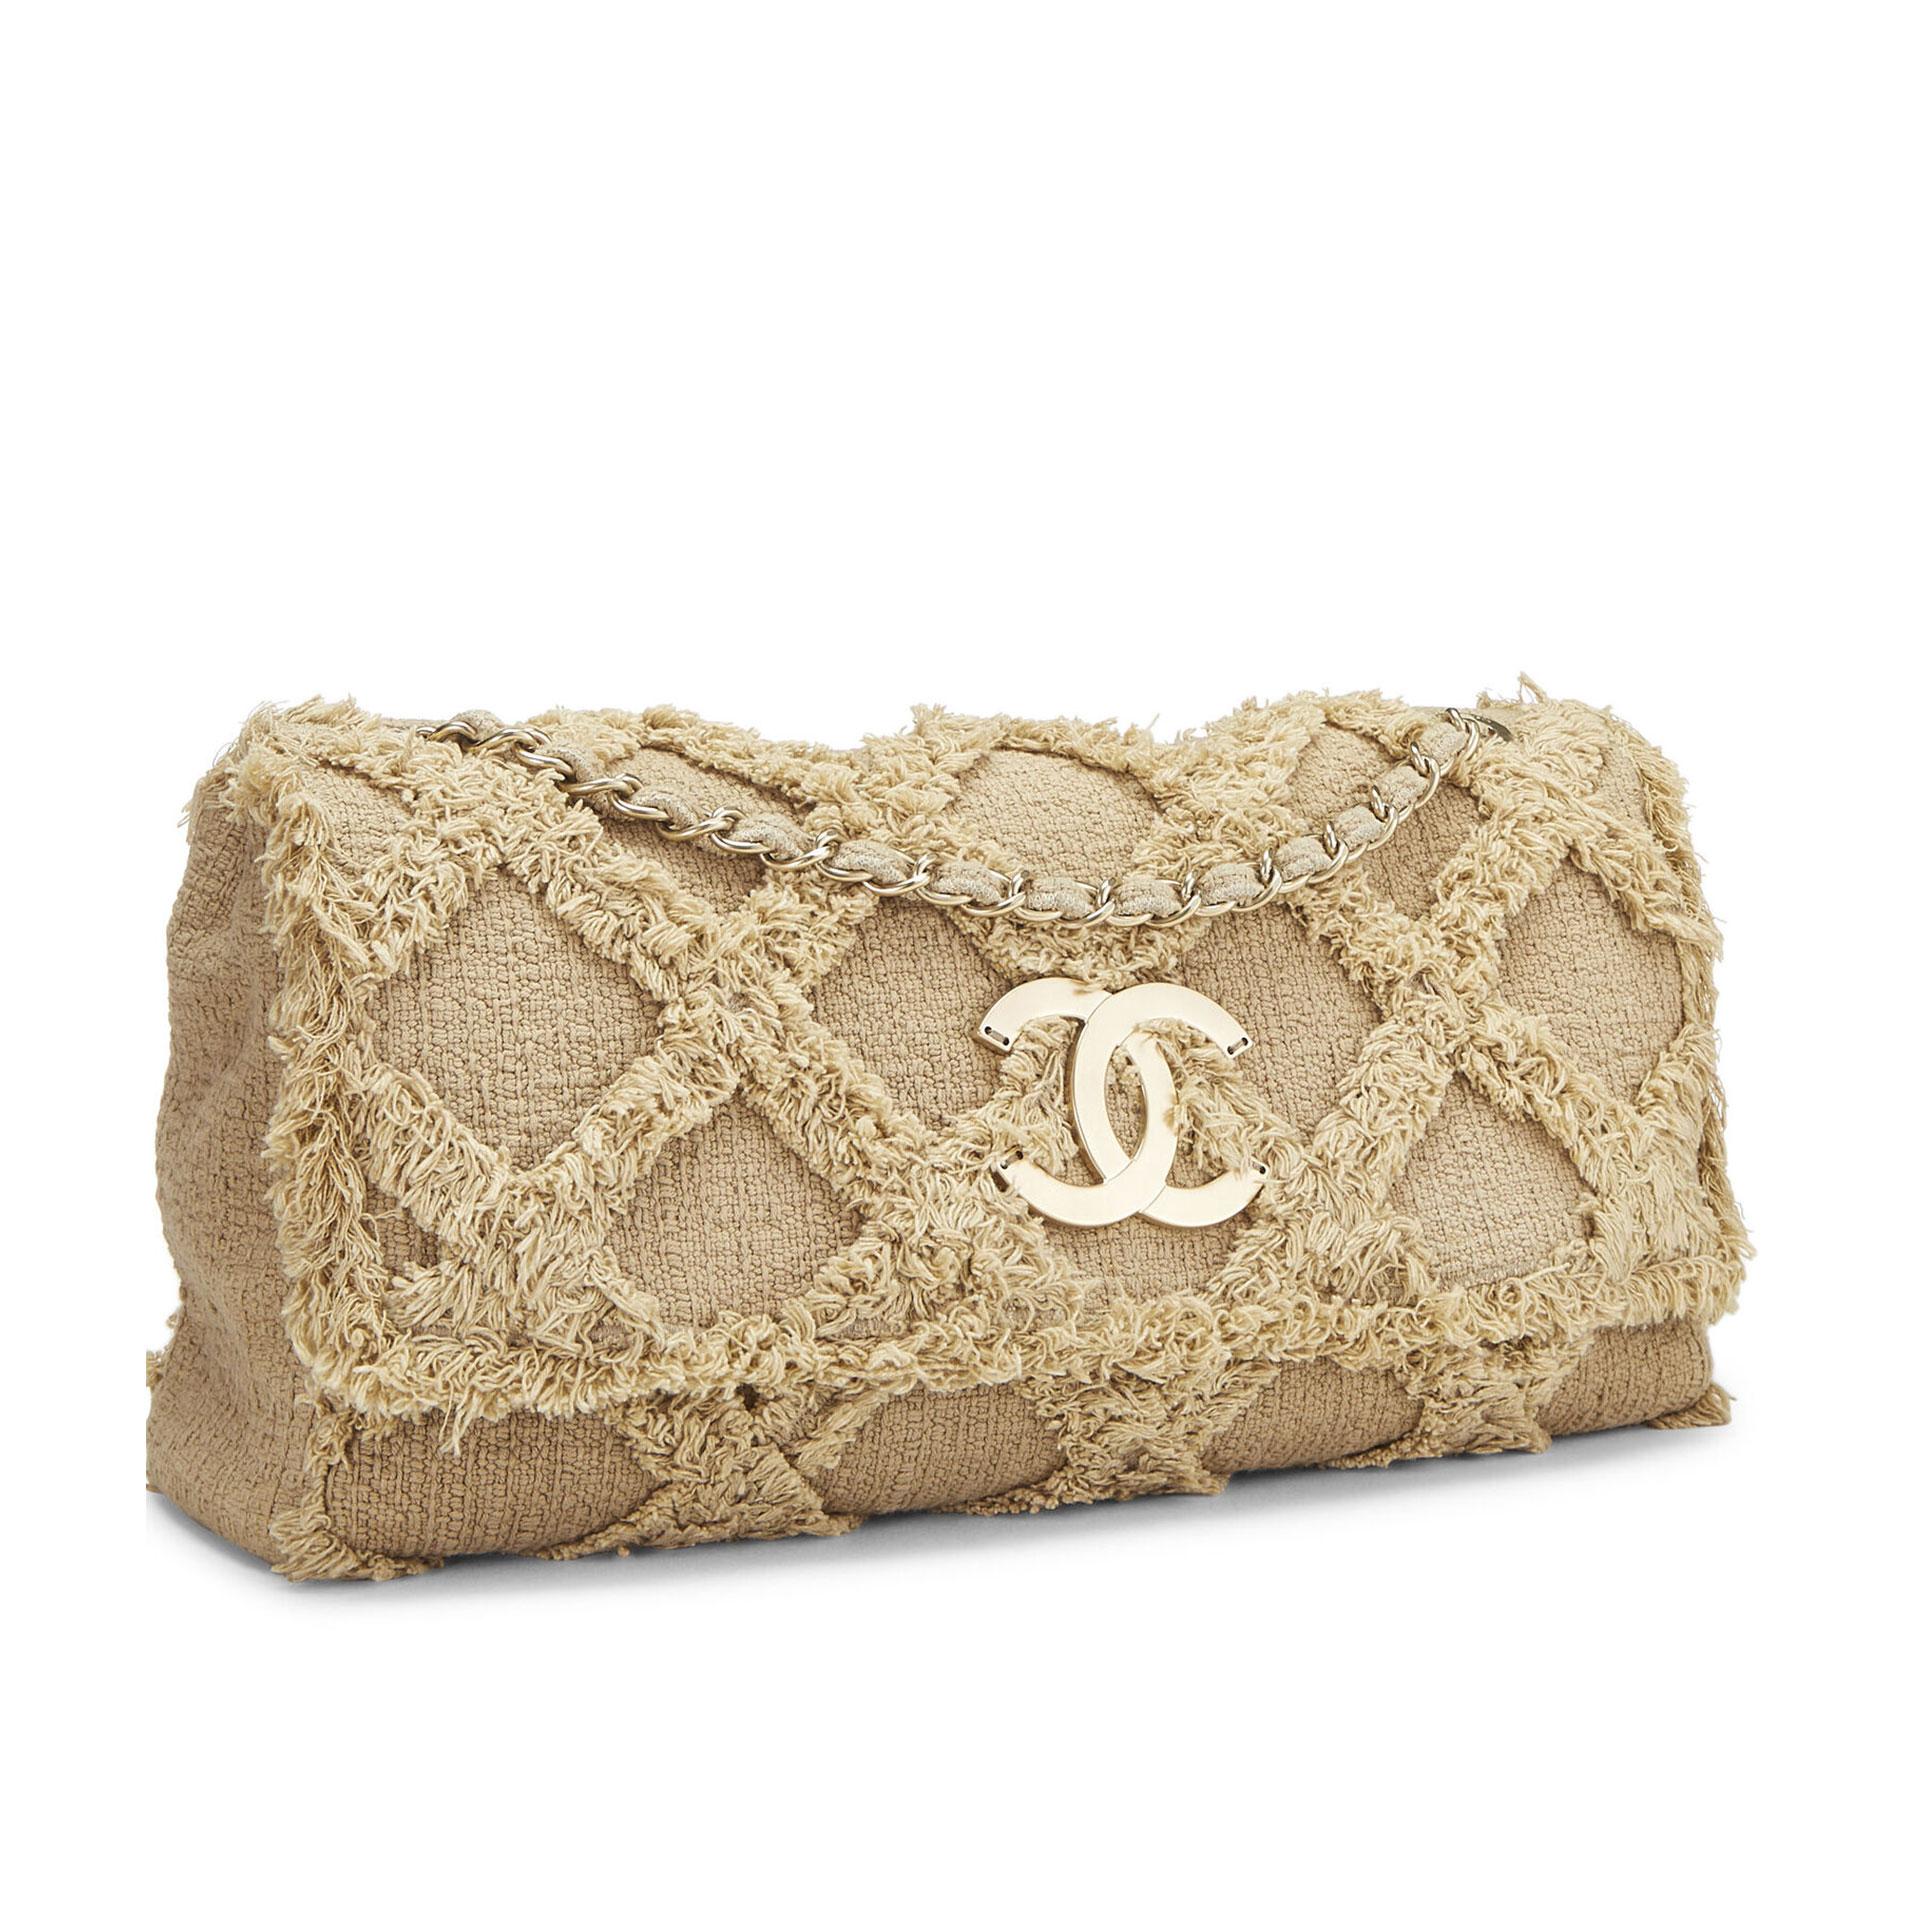 Chanel Limited Edition XL Maxi Organic Tweed Woven Summer Vacation Shoulder Bag  For Sale 5